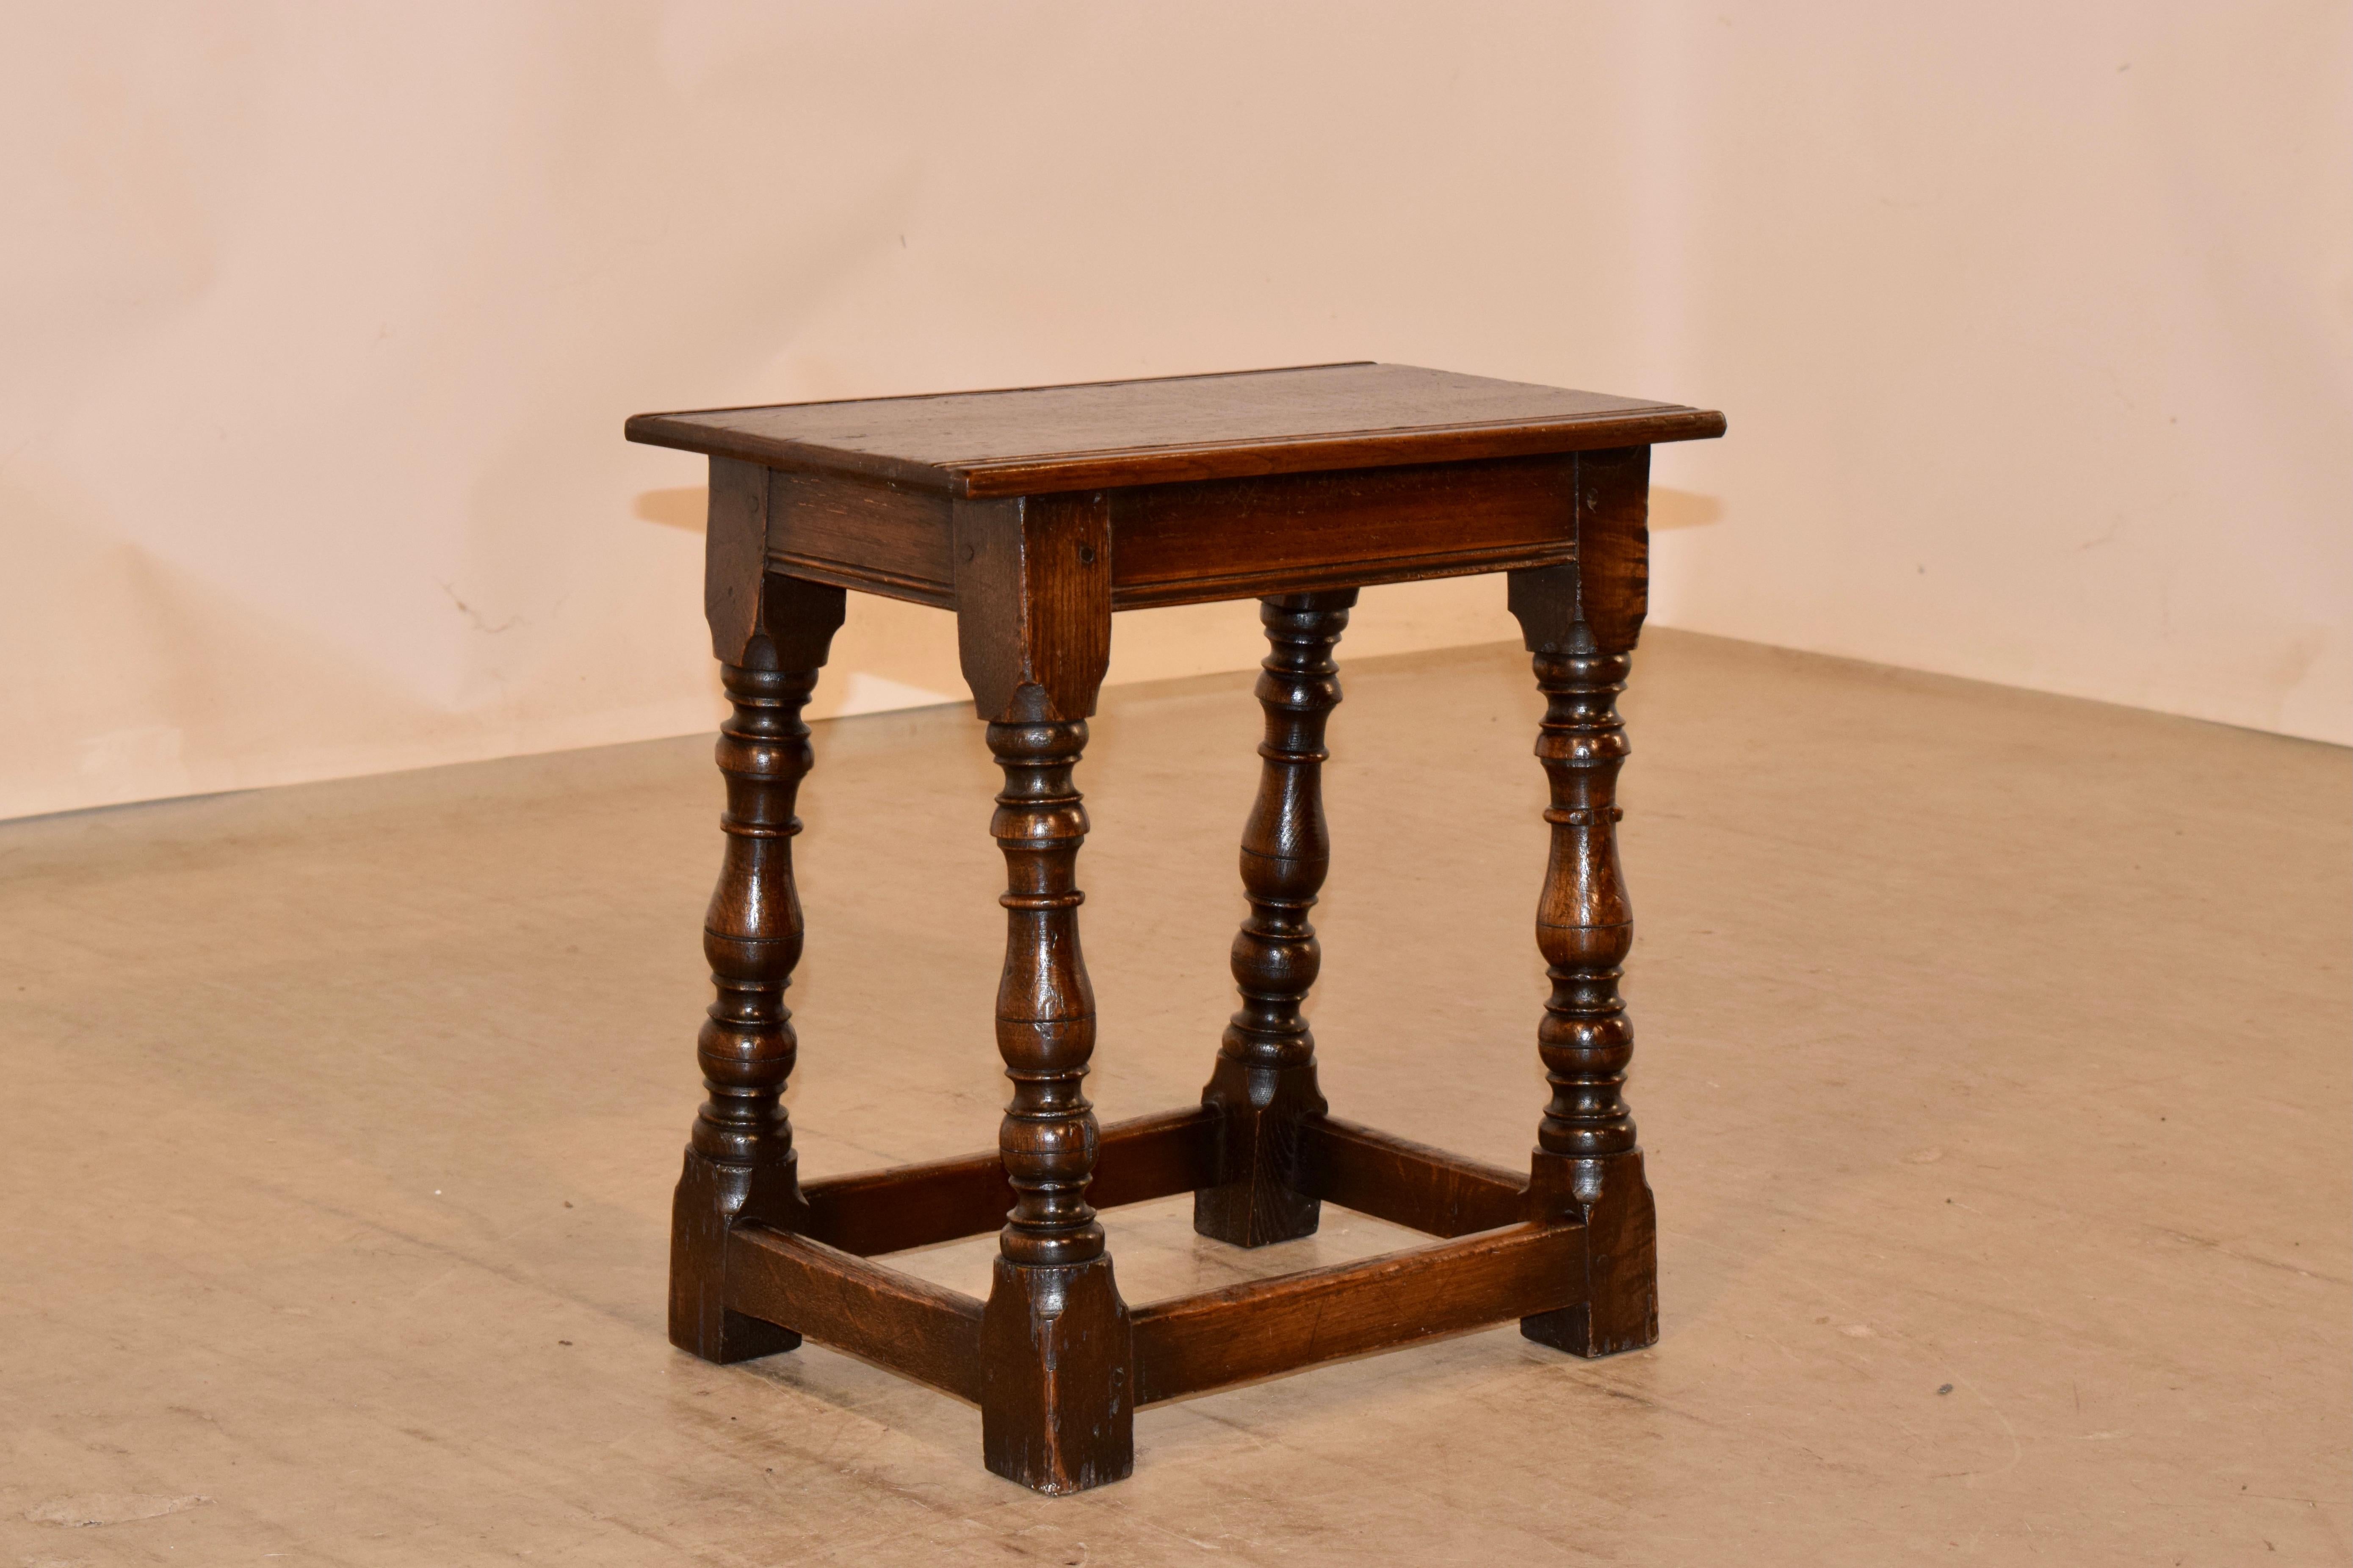 19th century oak joint stool from England with a routed edge on the top, following down to a simple apron also with routed detail along the edge and supported on hand turned splayed legs, joined by simple stretchers.